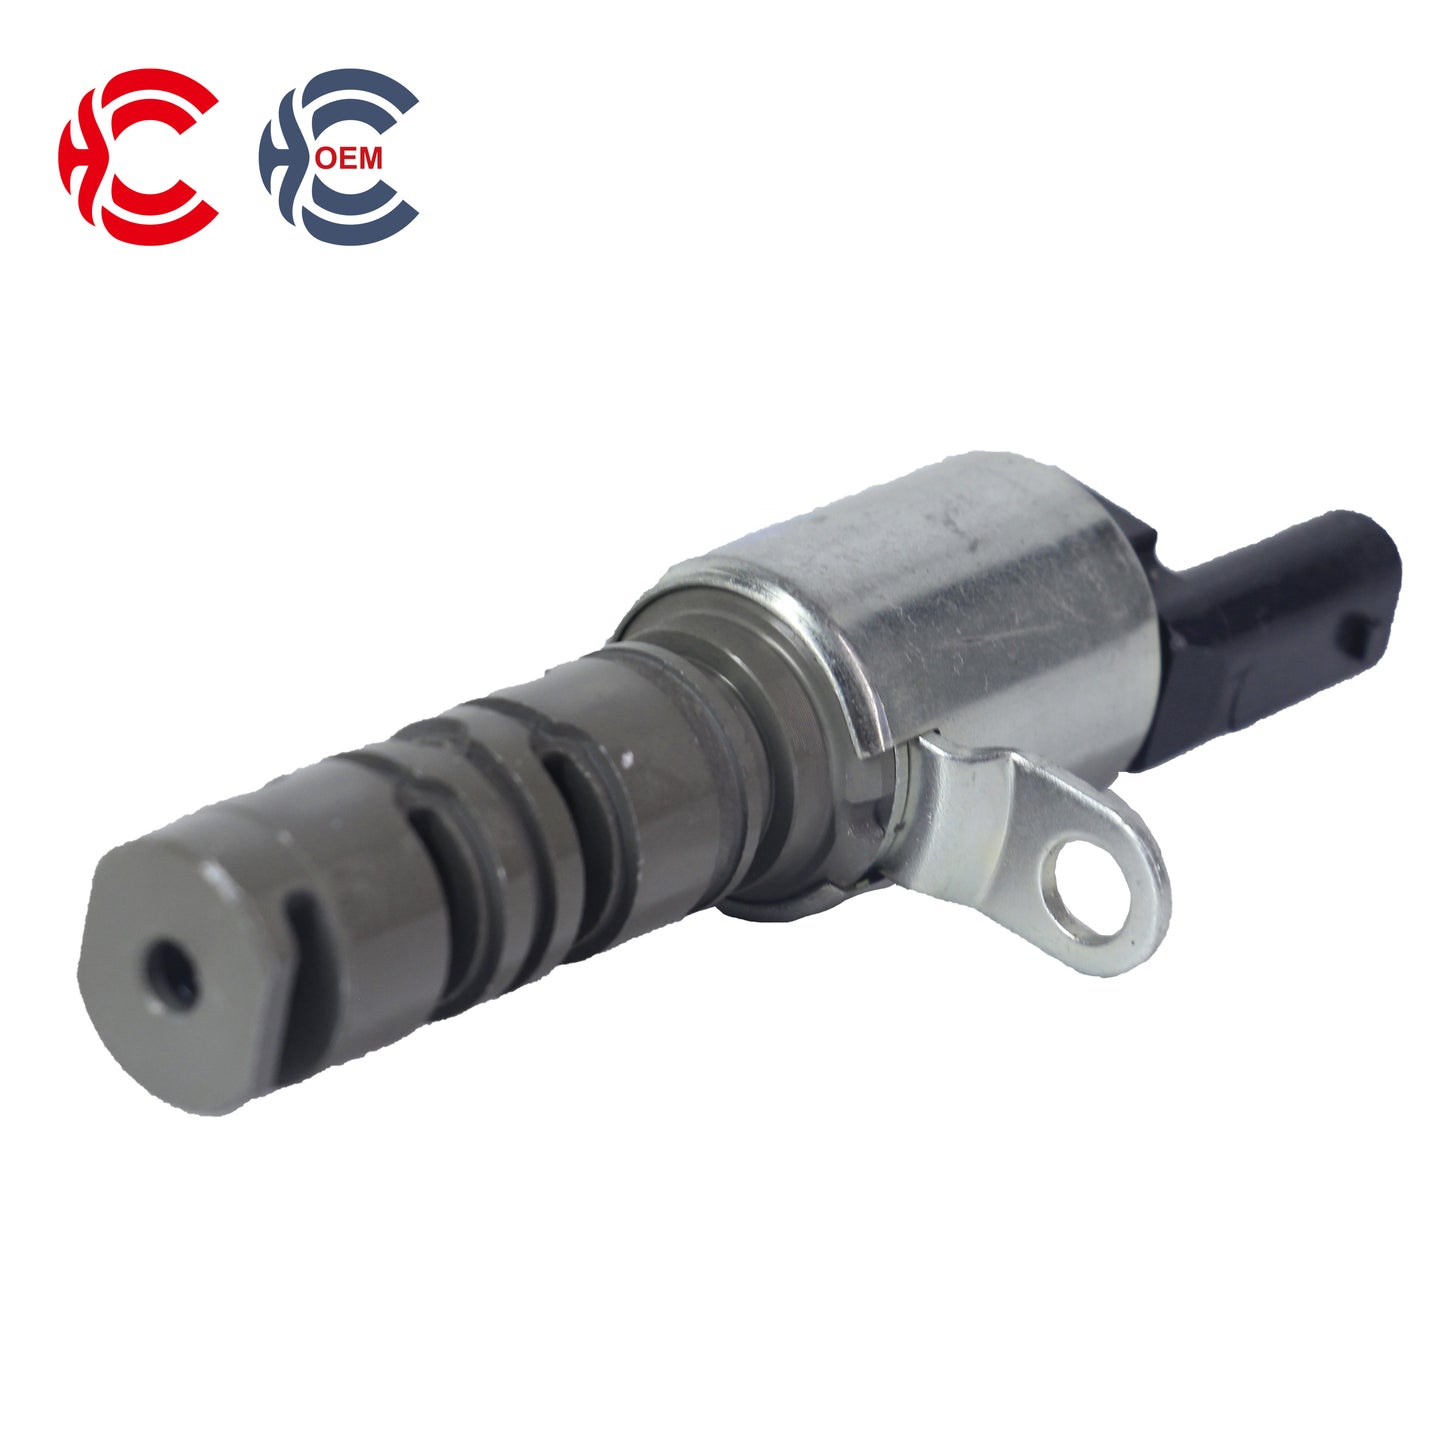 OEM: 455F5710G2Material: ABS metalColor: black silverOrigin: Made in ChinaWeight: 300gPacking List: 1* VVT Solenoid Valve More ServiceWe can provide OEM Manufacturing serviceWe can Be your one-step solution for Auto PartsWe can provide technical scheme for you Feel Free to Contact Us, We will get back to you as soon as possible.